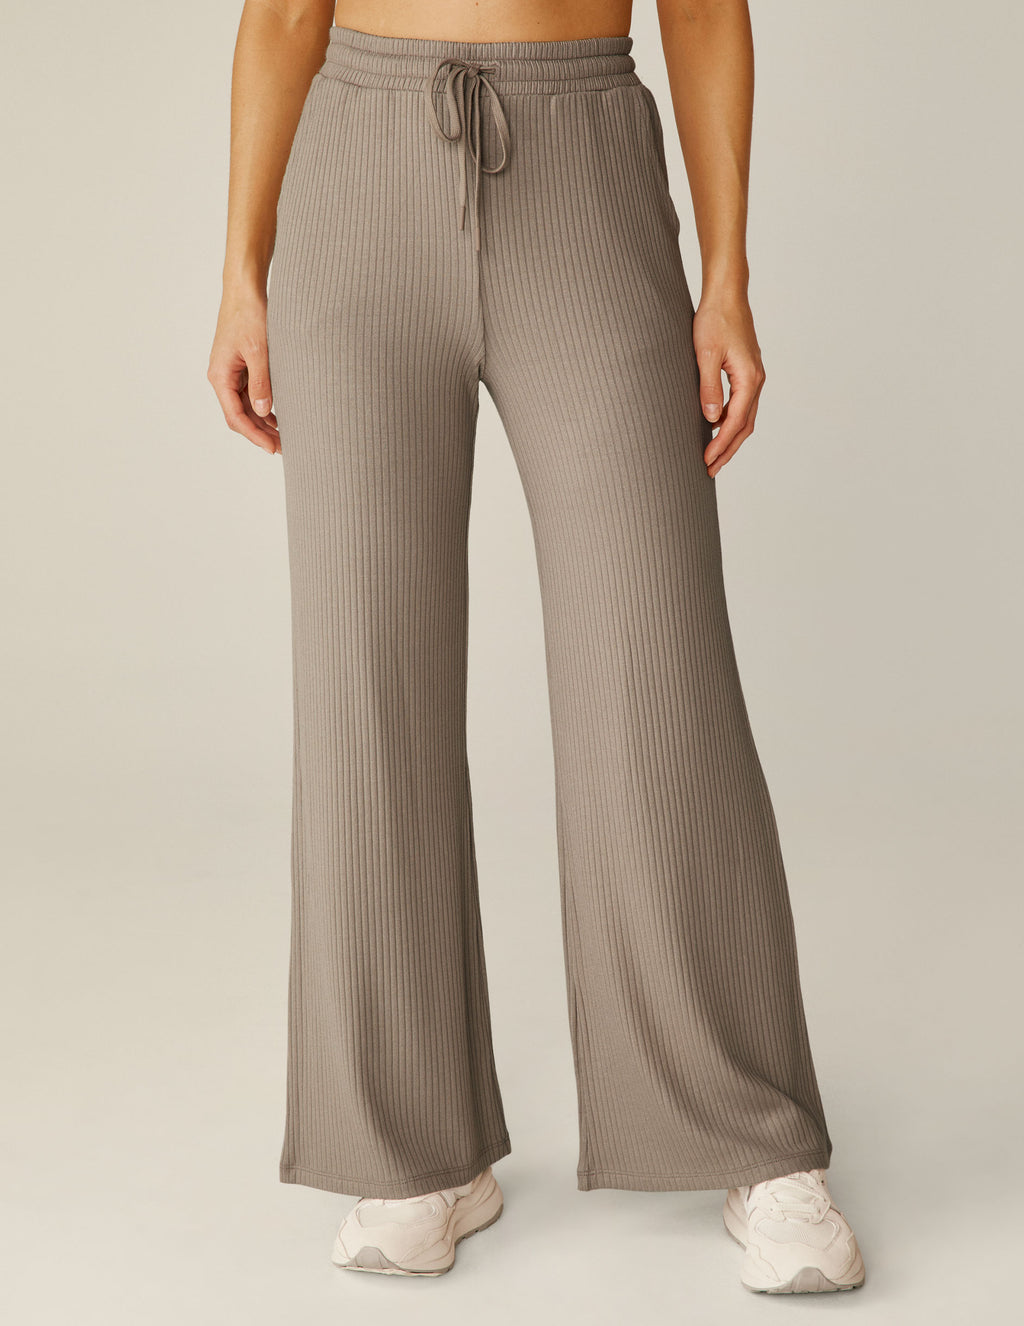 Beyond Yoga Heather Rib All Day Flare Pants  Anthropologie Japan - Women's  Clothing, Accessories & Home